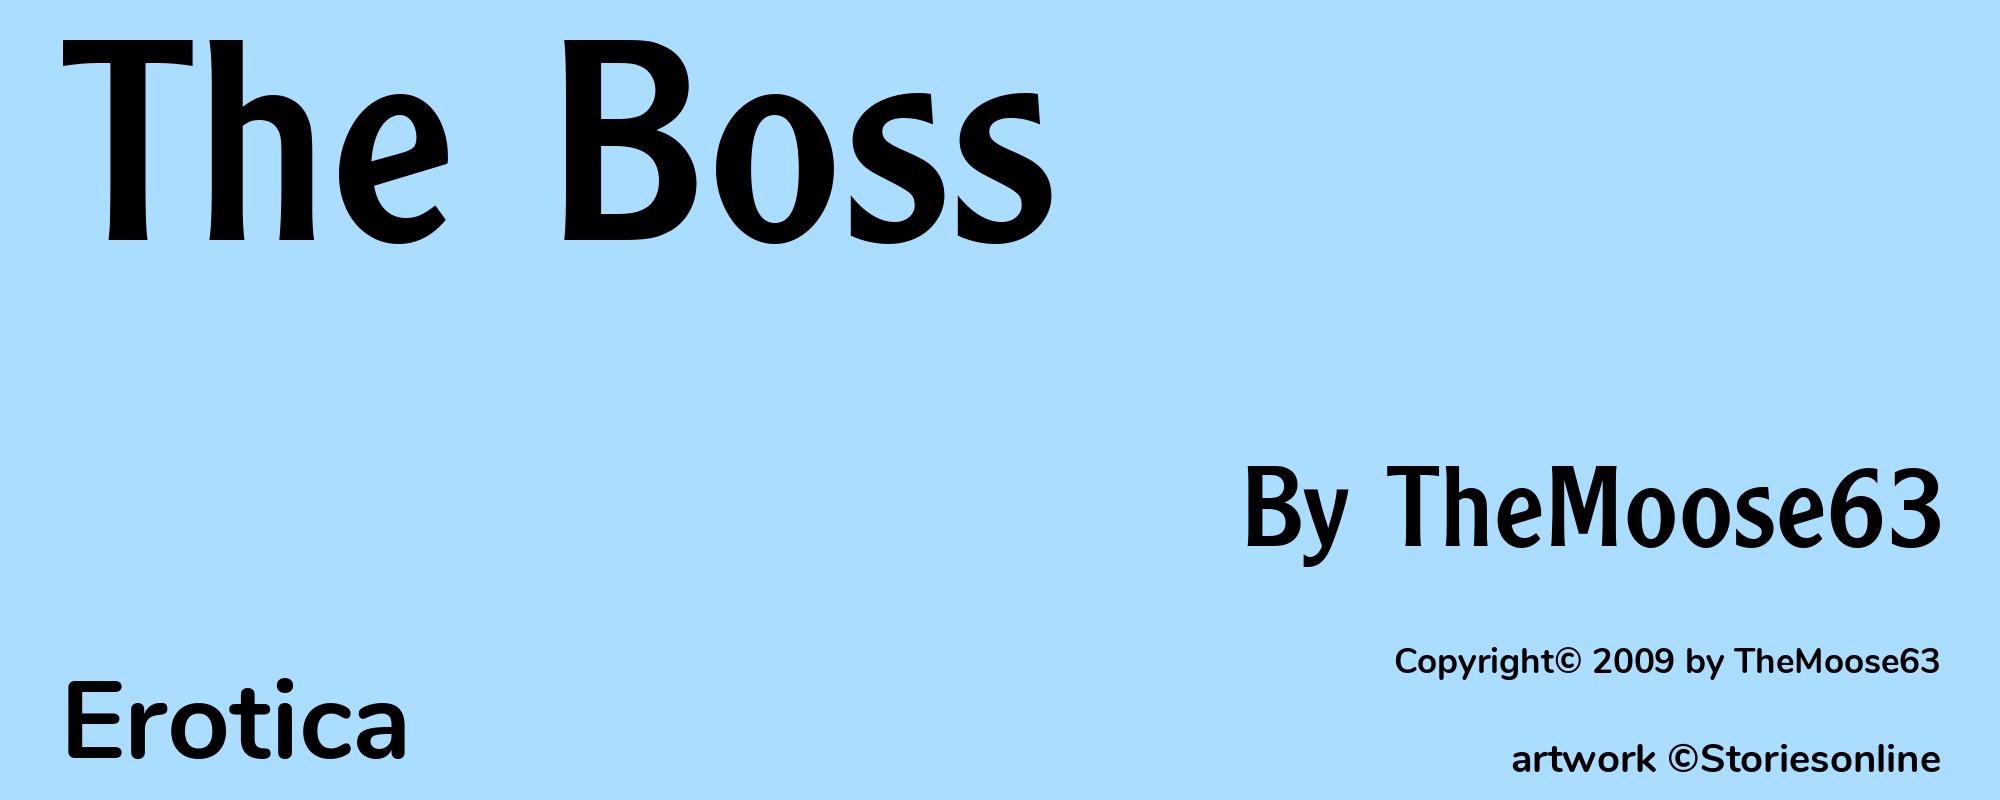 The Boss - Cover